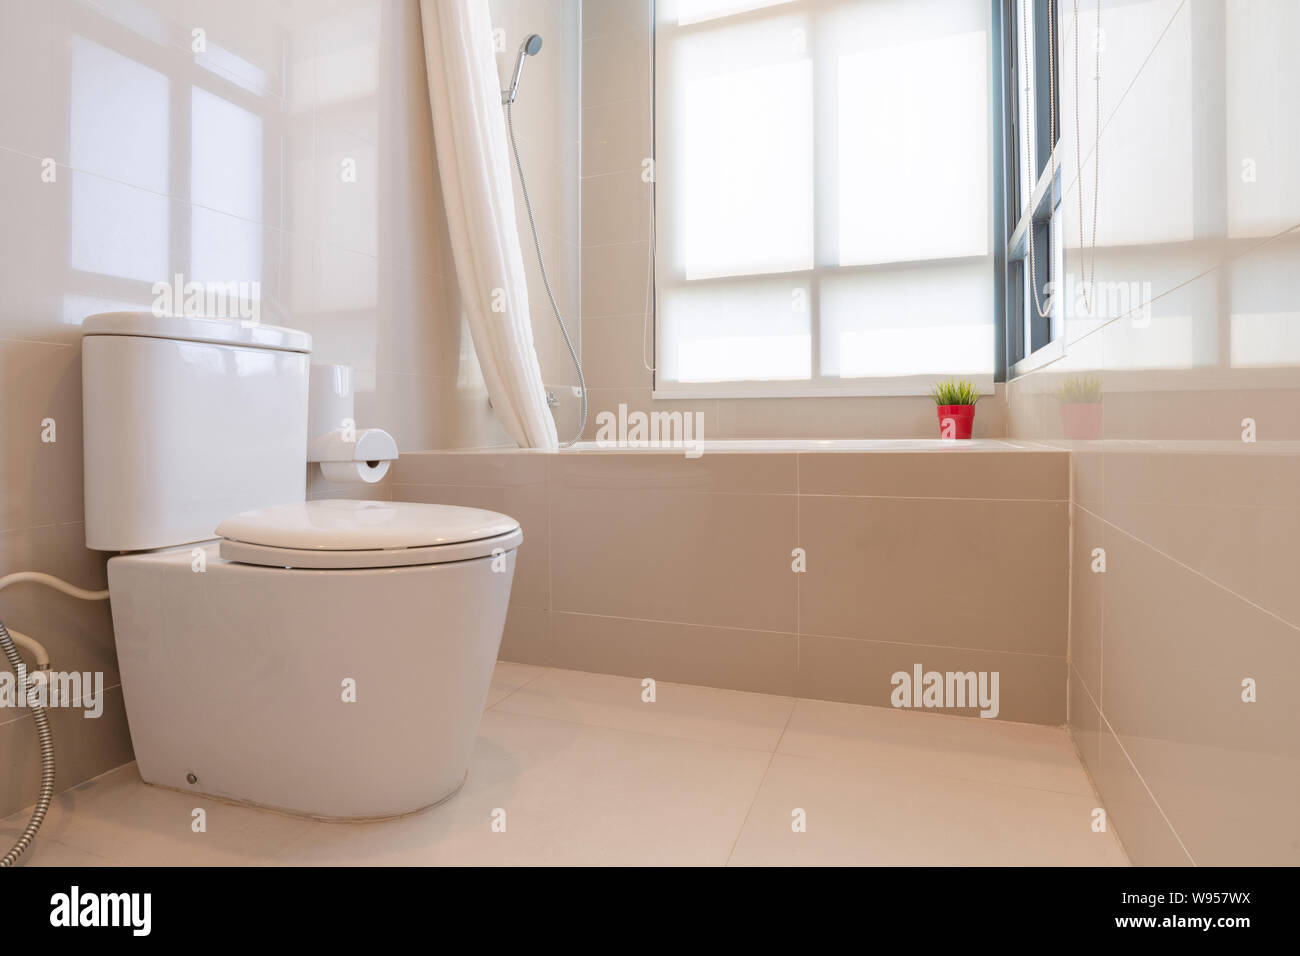 Interior of modern design home bathroom with shower and toilet Stock Photo